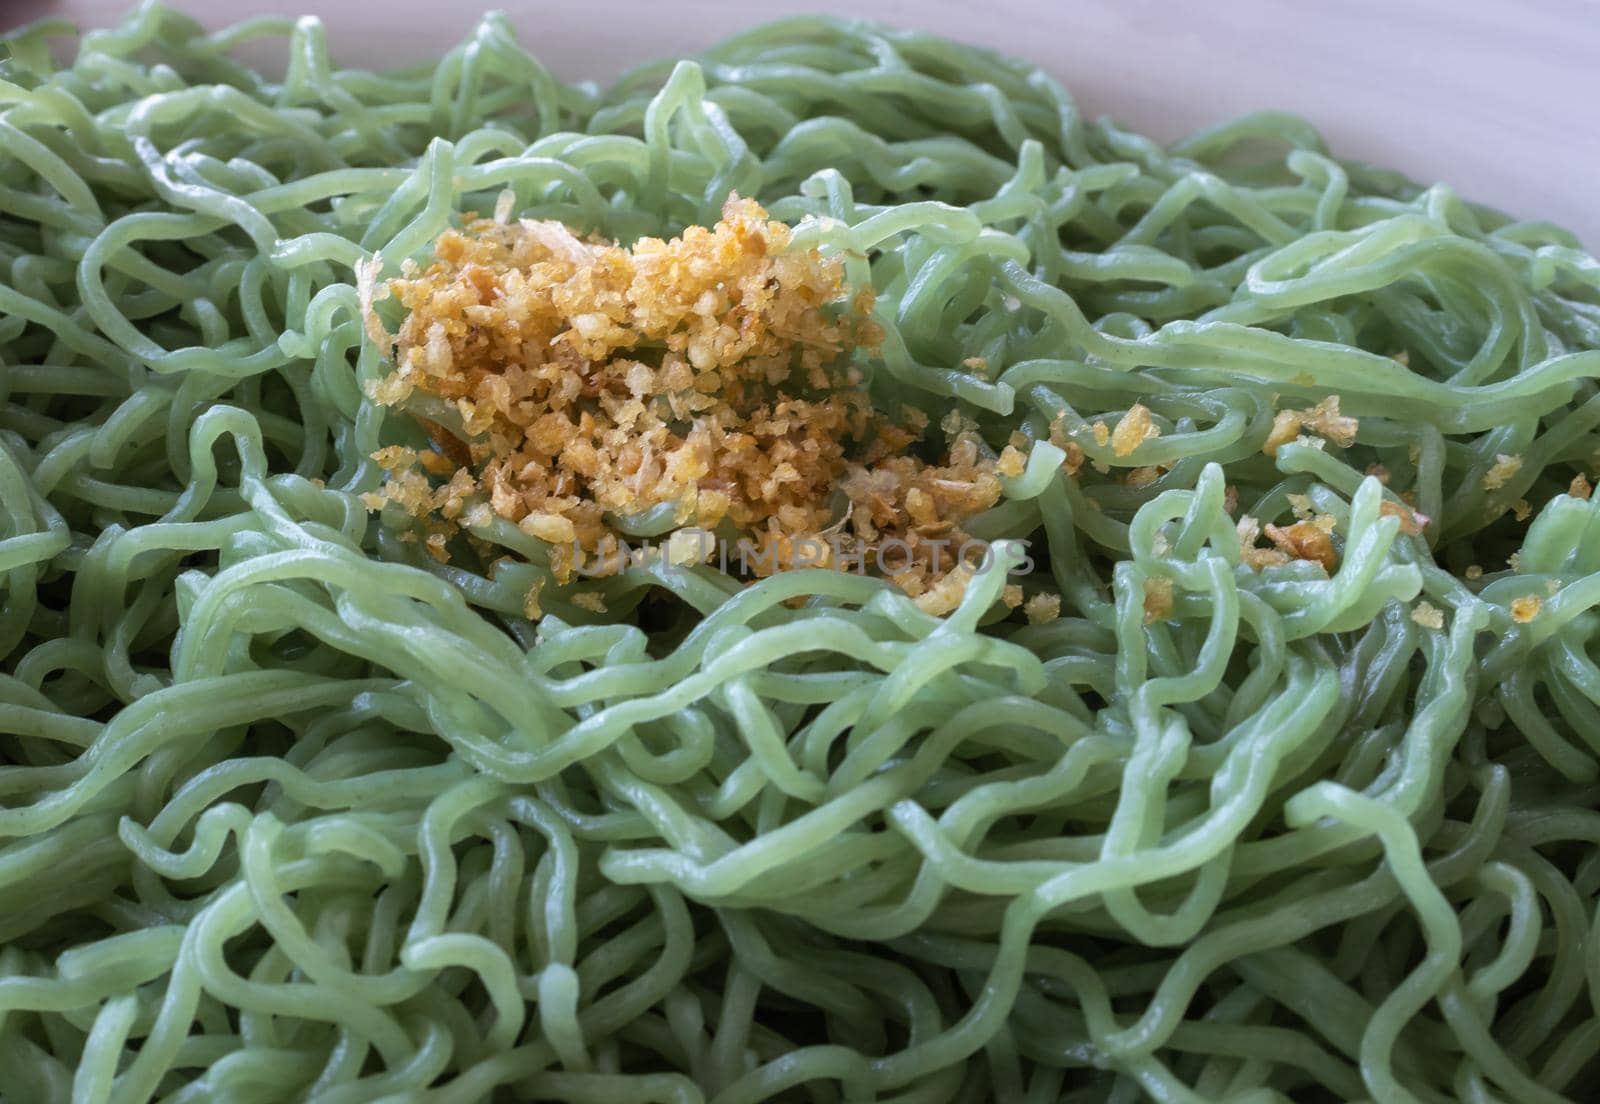 Green noodles sprinkled on top with fried garlic, taken close-up.